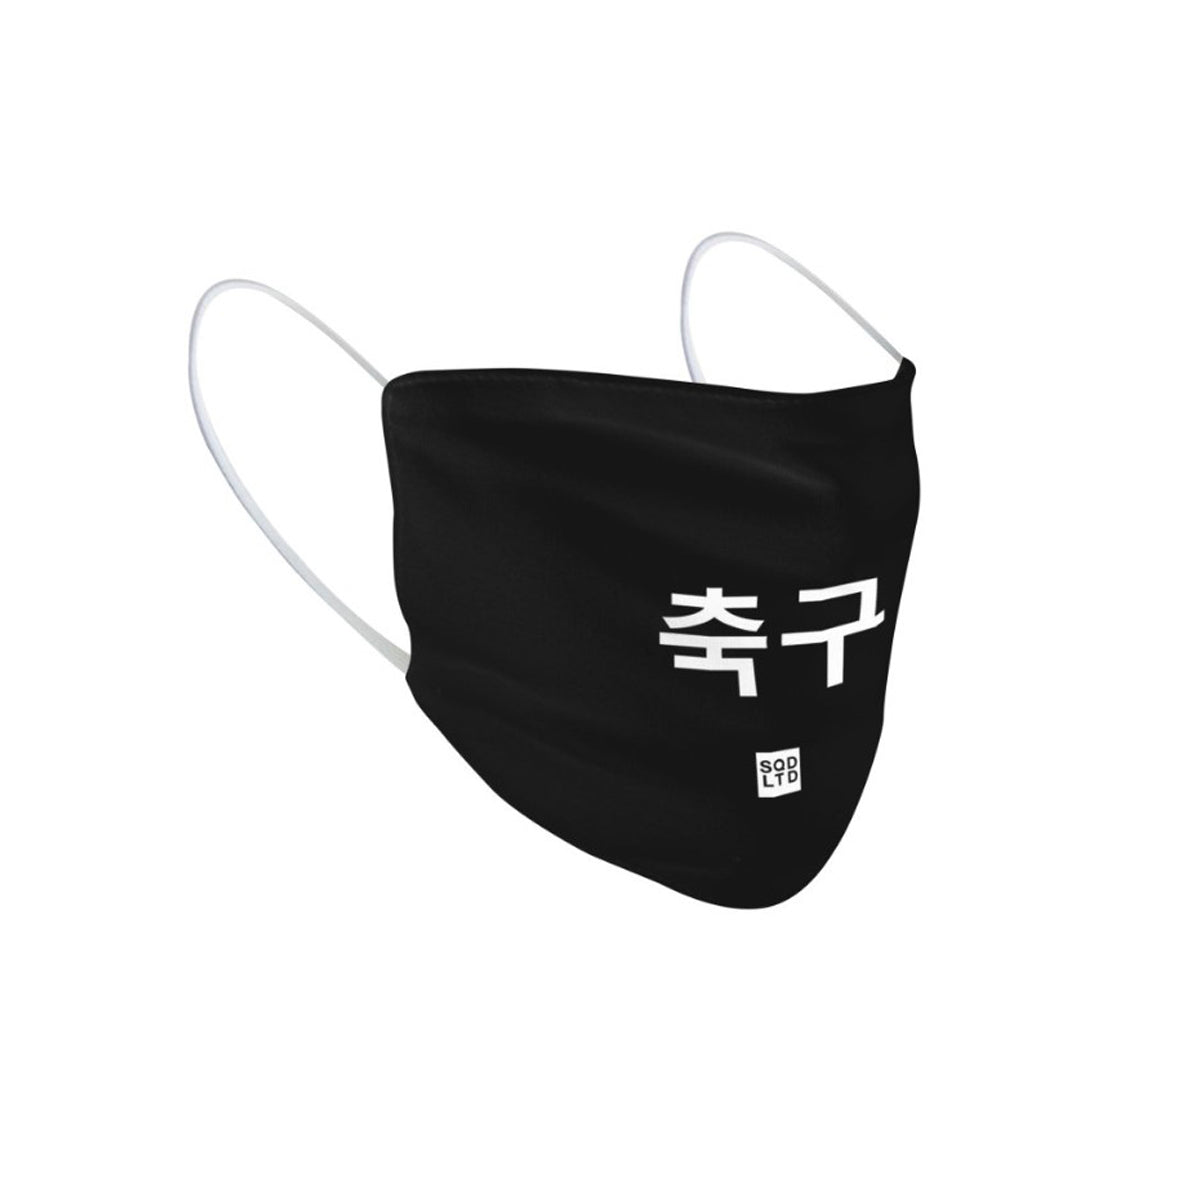 KOR Soccer Face Mask WL by Squared Limited